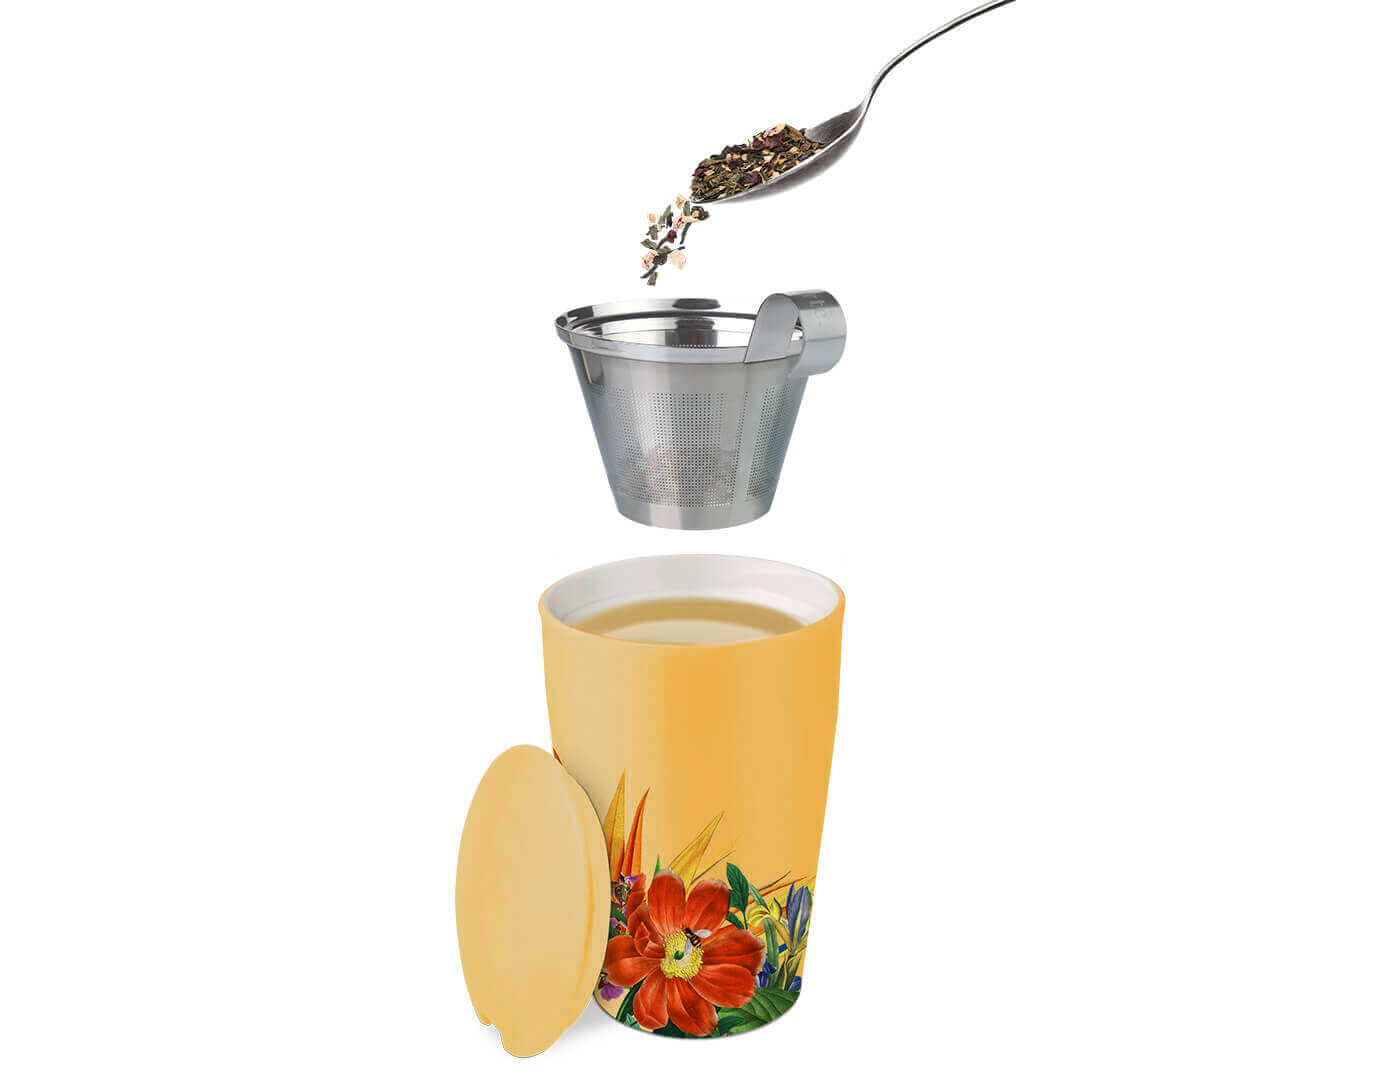 Paradis Kati Steeping Cup, open, spooning in tea, with lid and infuser